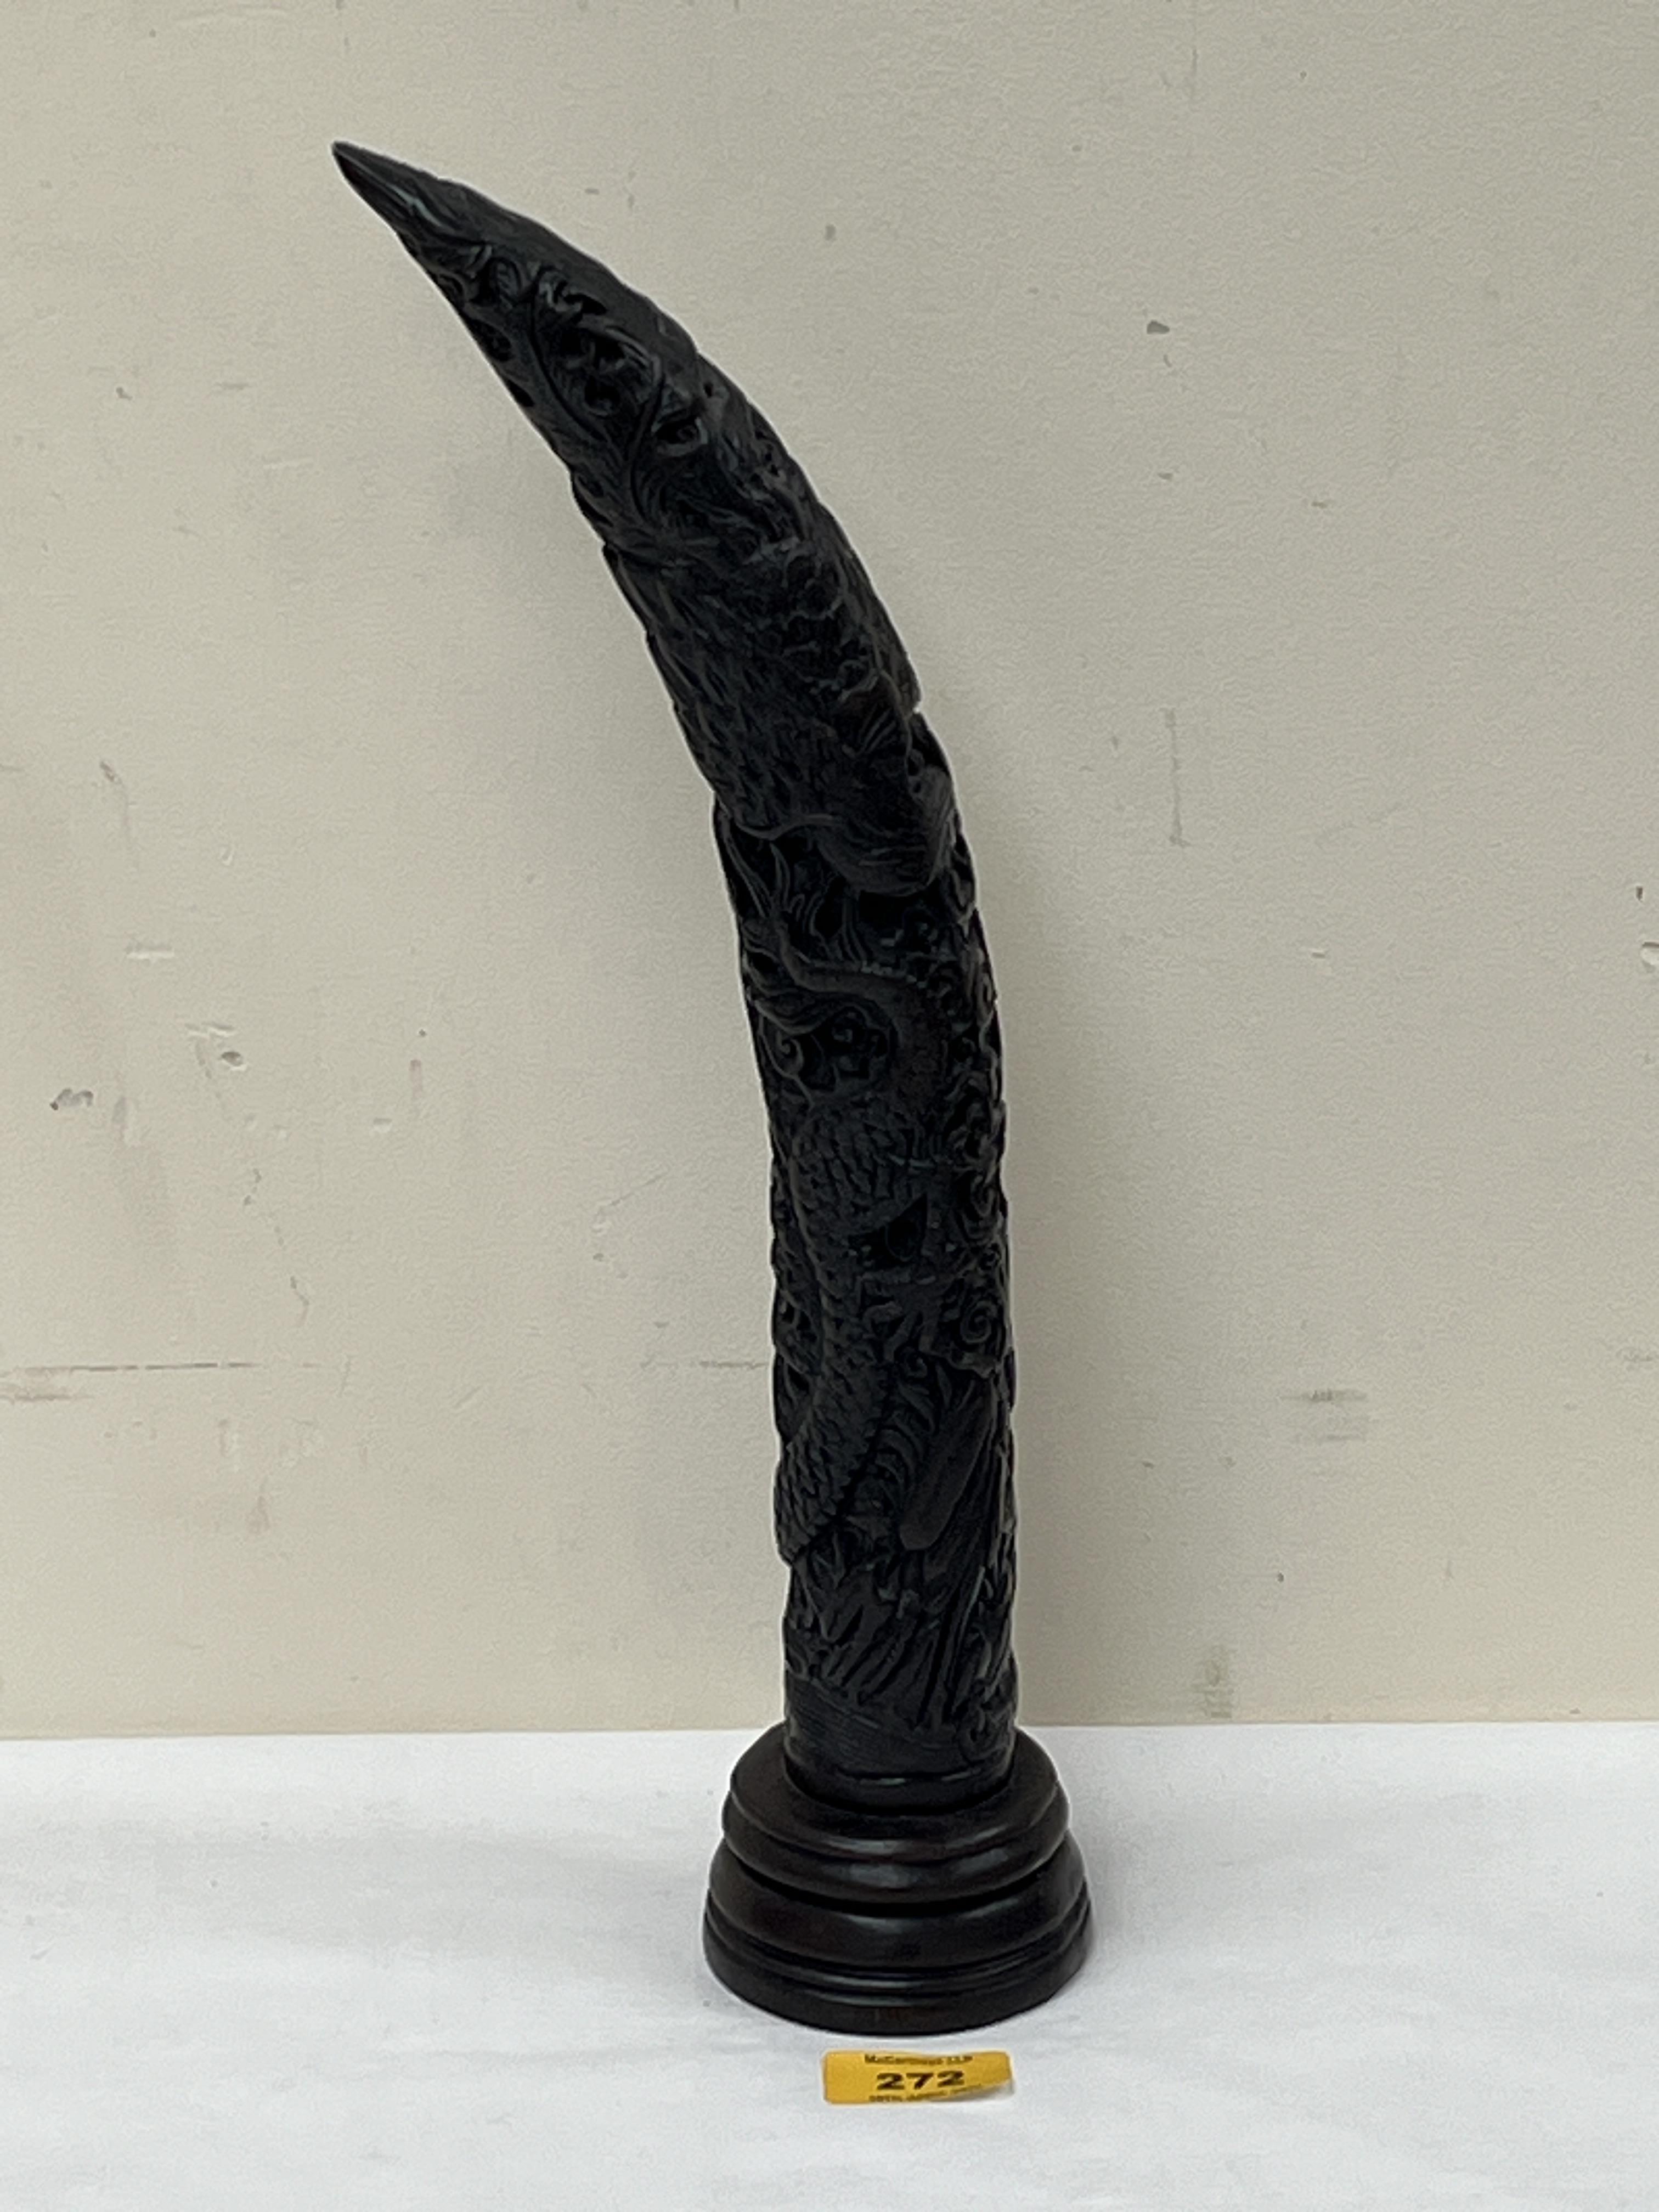 A resinous decorated horn form ornament, 15" high